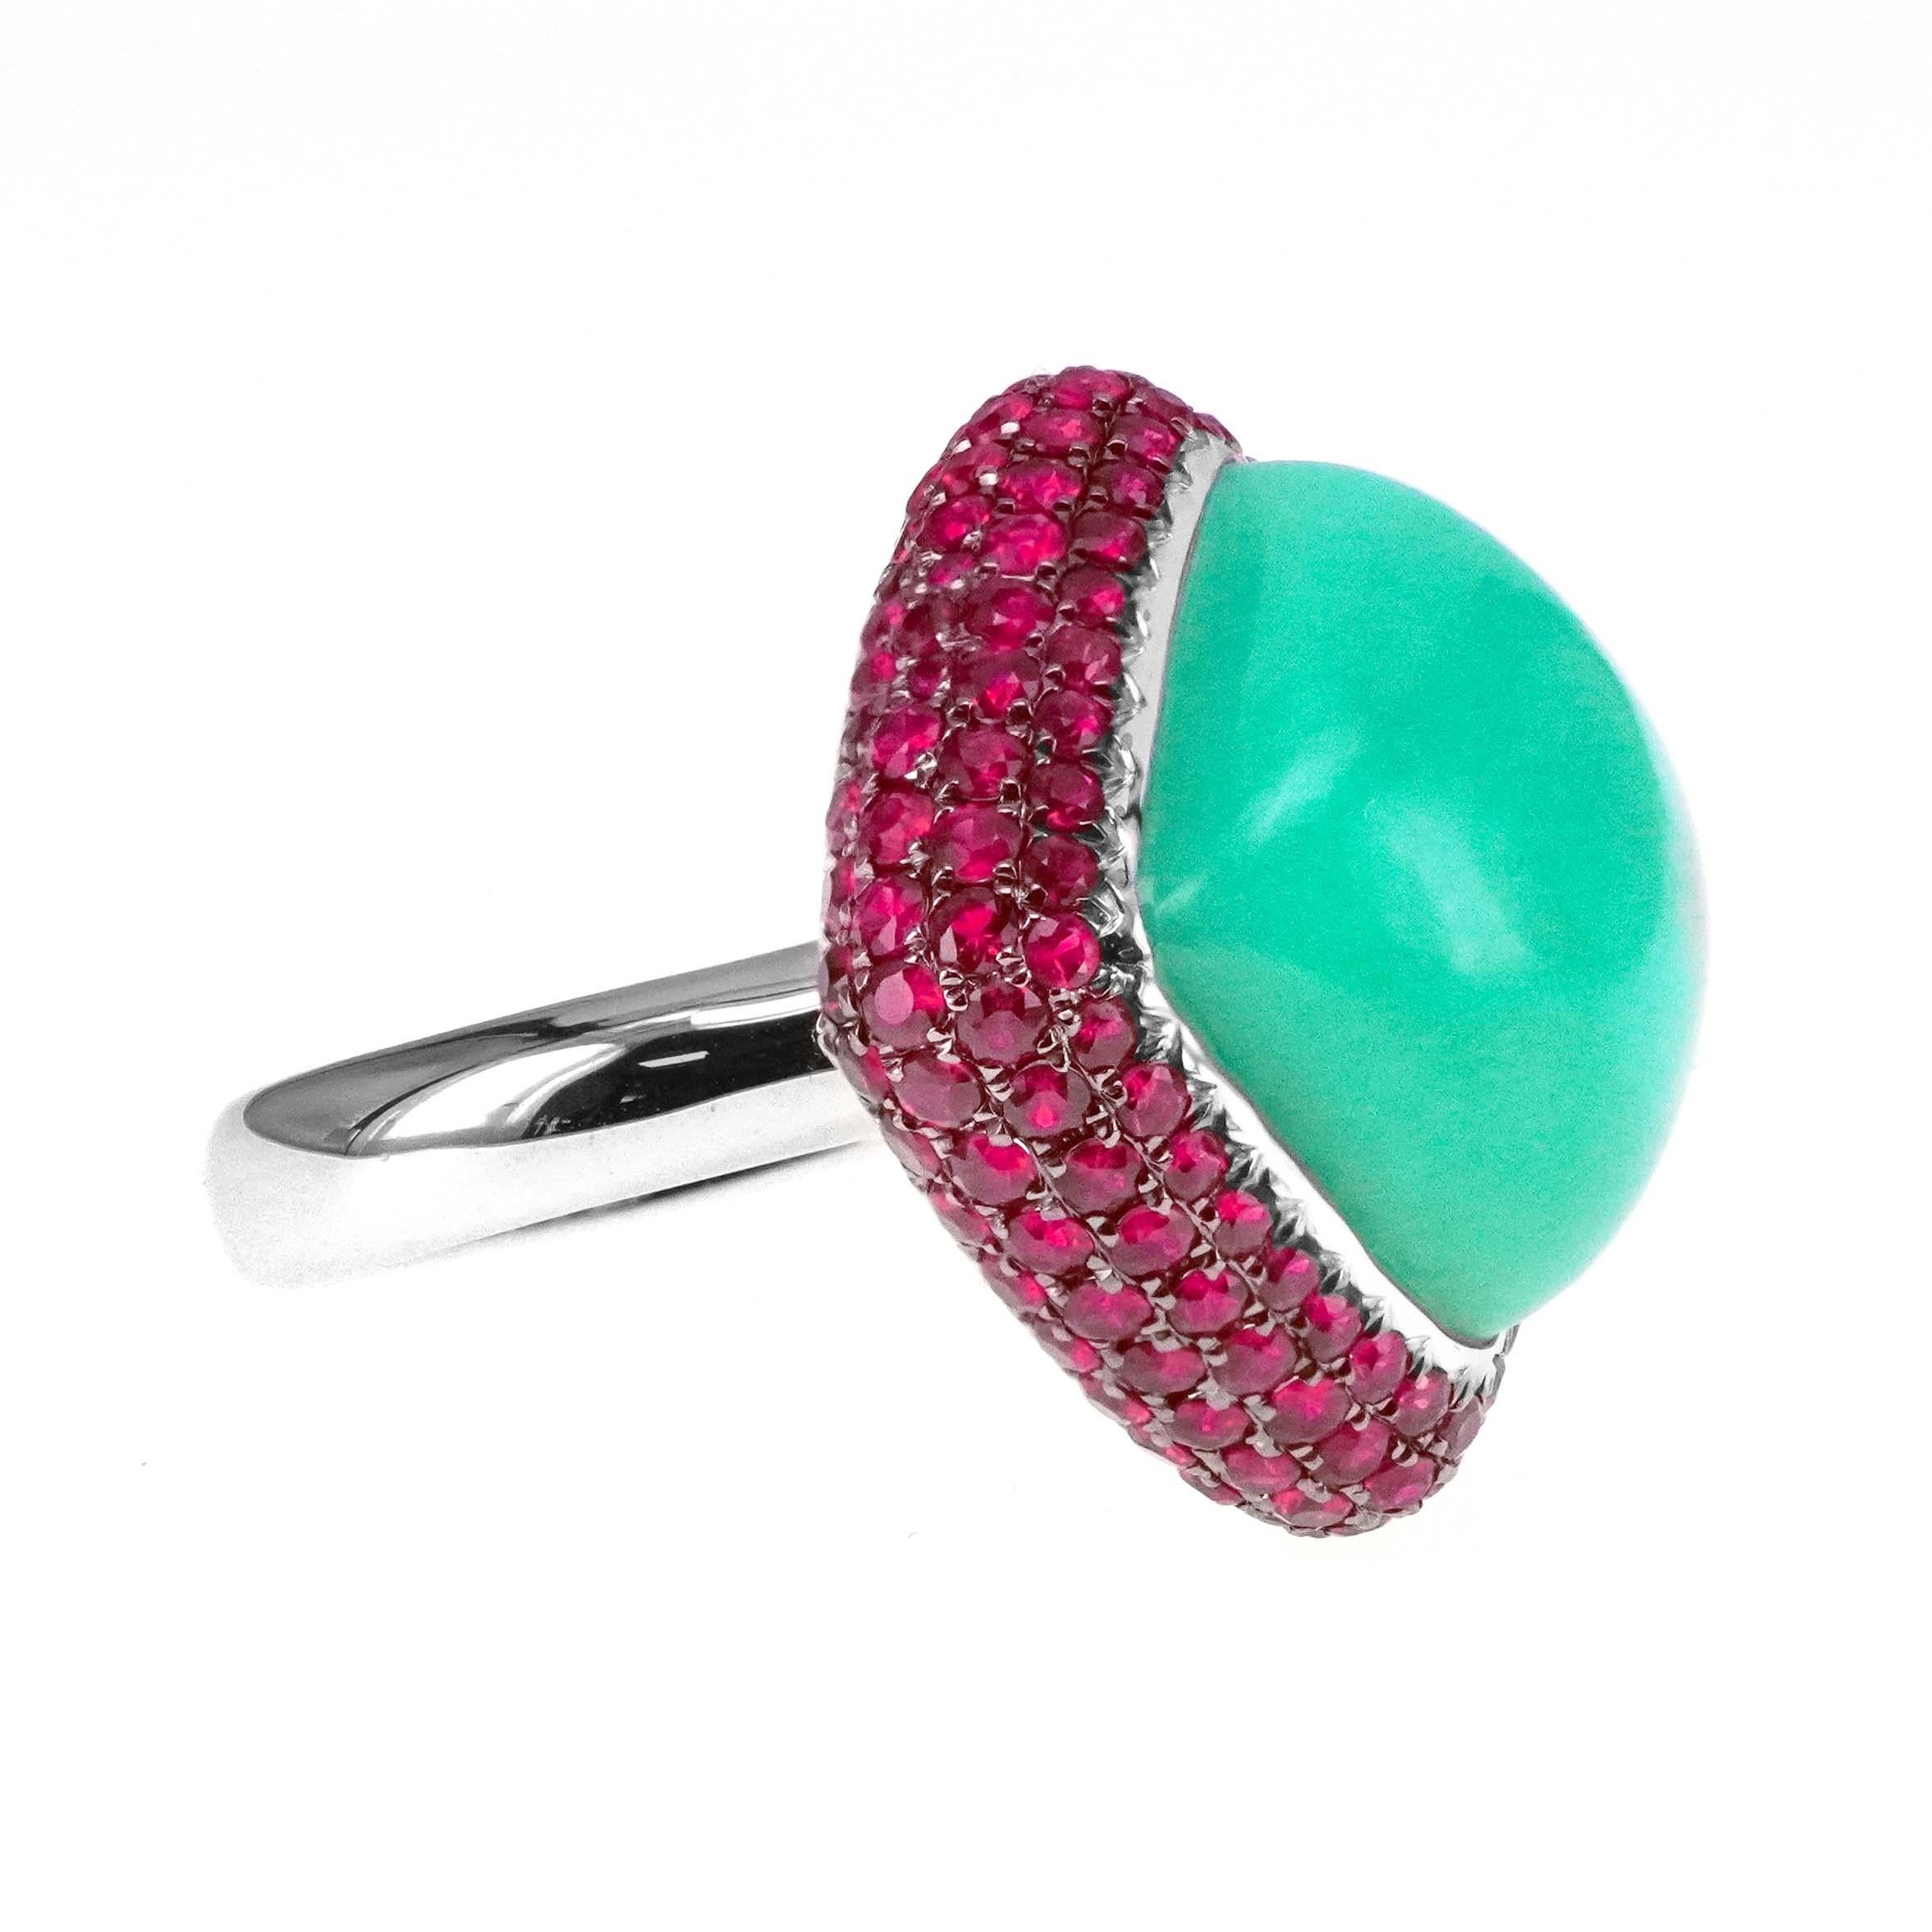 Anglo-Indian 15.35 Carat Chrysoprase & 2.98 Carat Vivid Red Burma Ruby Unique Table Top Ring For Sale